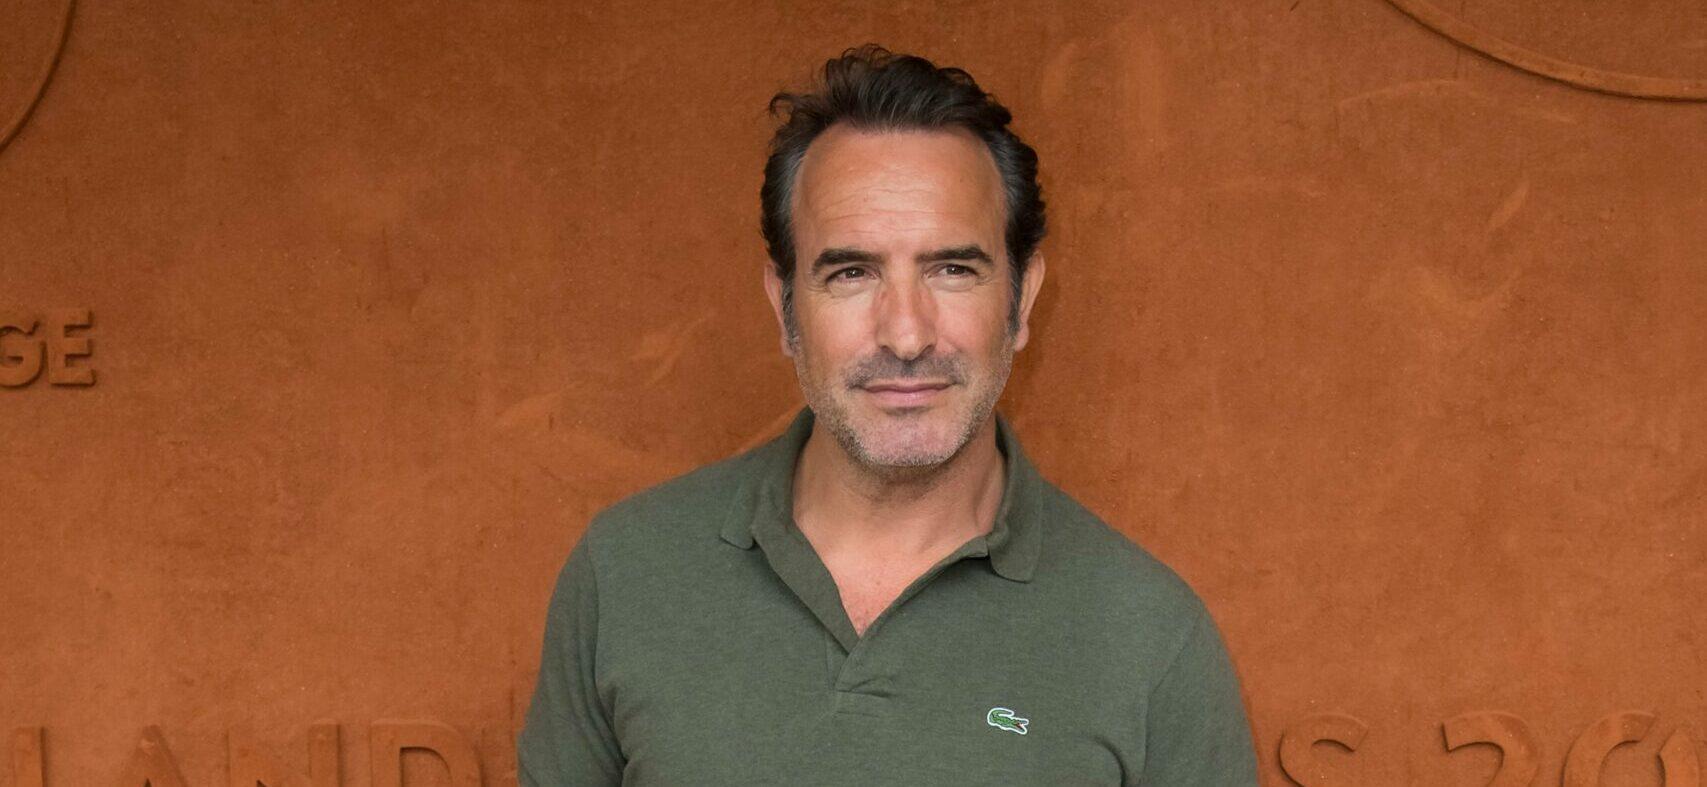 Jean Dujardin Reveals Why He Didn’t Stay In Hollywood